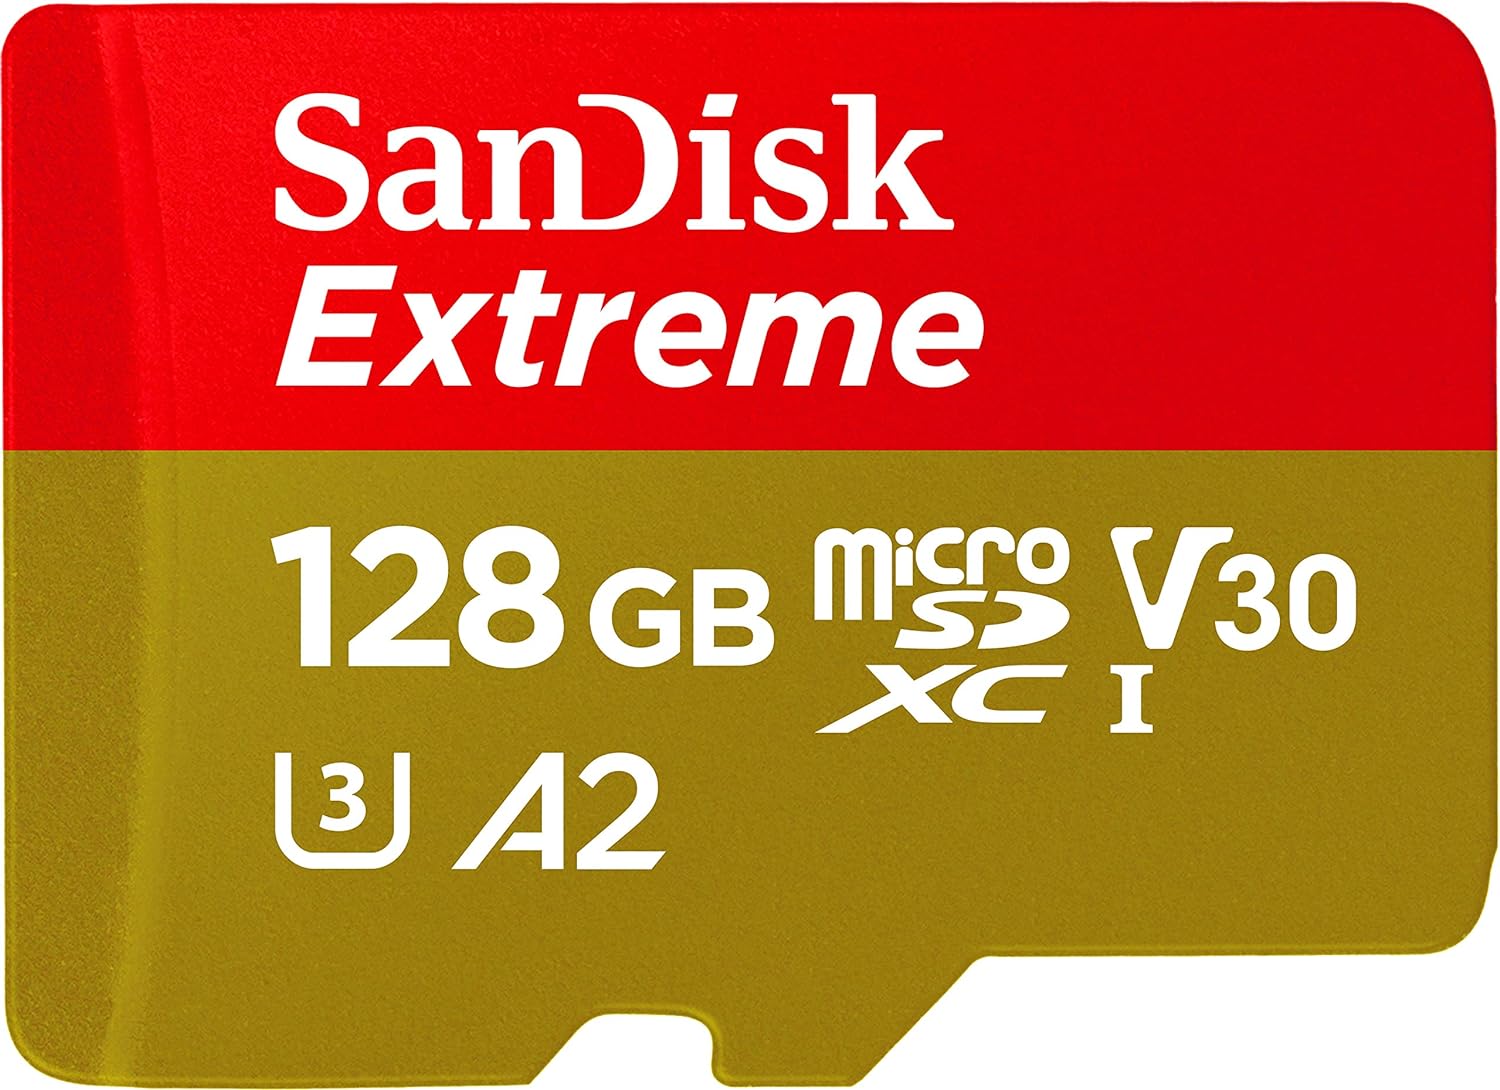 SanDisk 128GB Extreme microSDXC UHS-I Memory Card: A Comprehensive Review